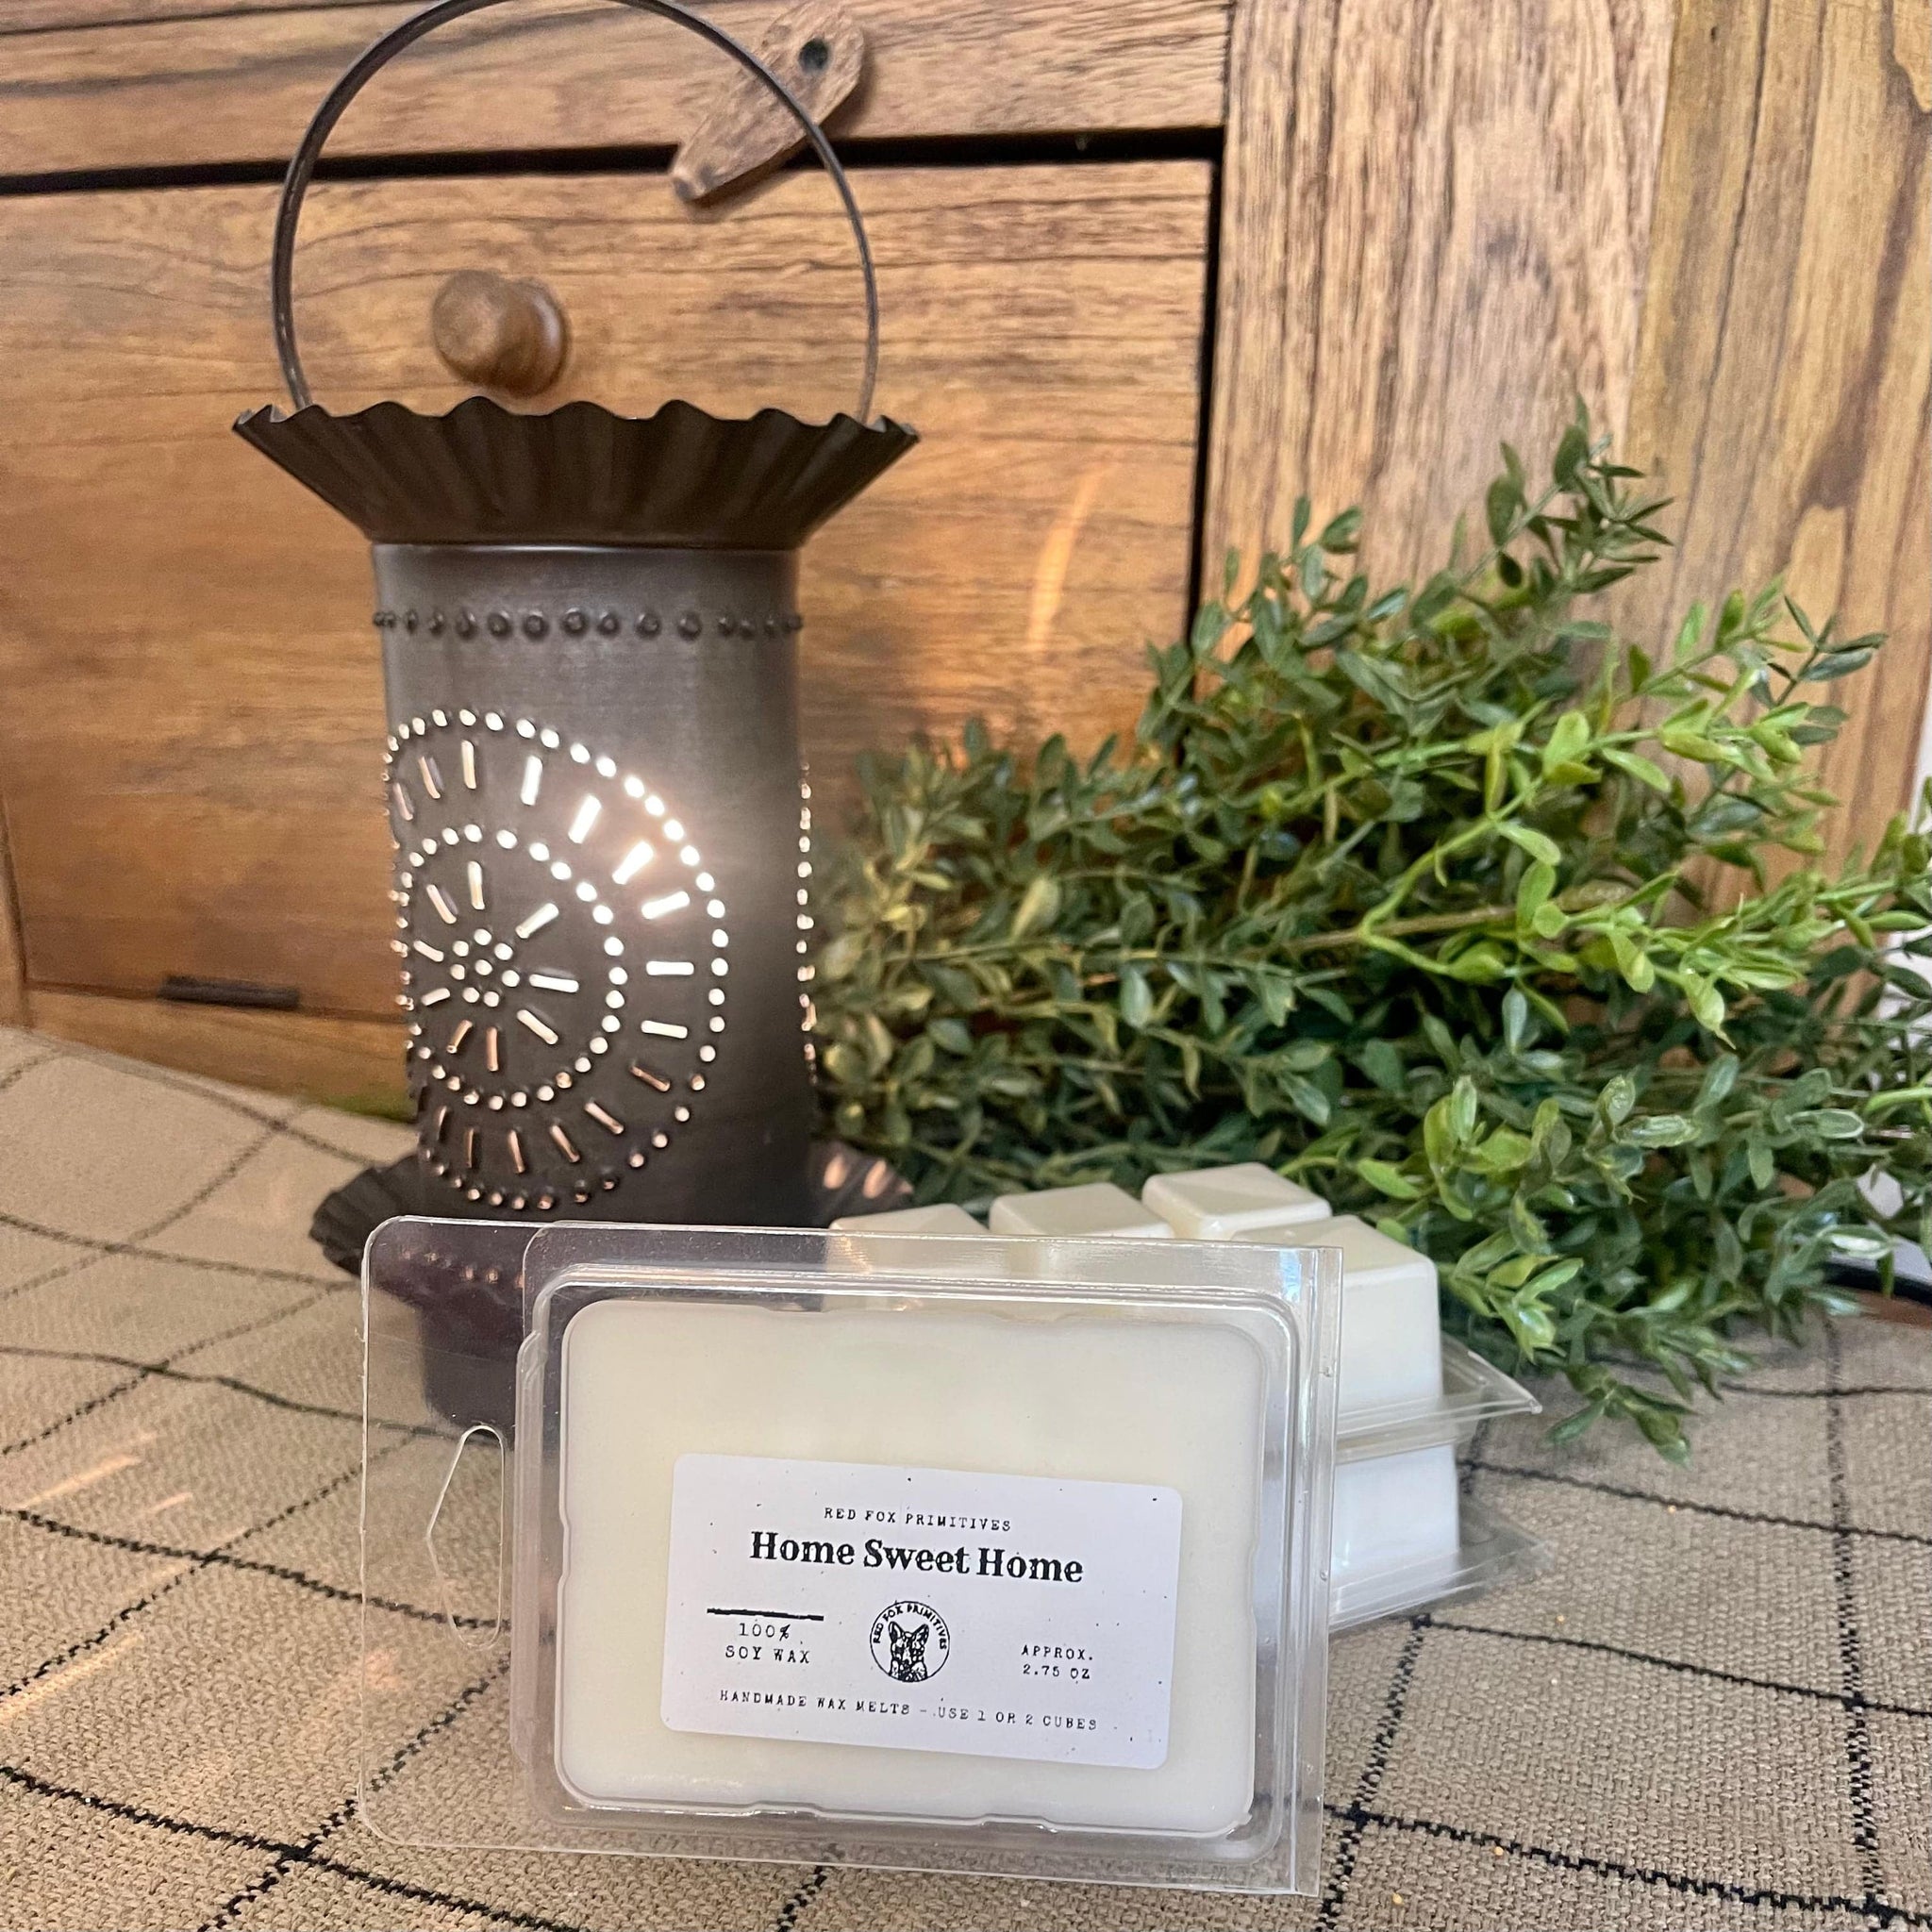 Chisel Wax Warmer w/ Wax Melts Starter Pack! Best, Bundles, Christmas, Christmas Decor, Christmas Decorating, Decor, Farmhouse Christmas Decor, Farmhouse Decor, Farmhouse Decorating, For Sale, Home Accents, Lighting, New, Pre-Sale, Primitive Candles, Primitive Decor, Primitive Decorating, Scented Wax Warmer, Spring Scents, Tart Warmer, Wax Warmer 